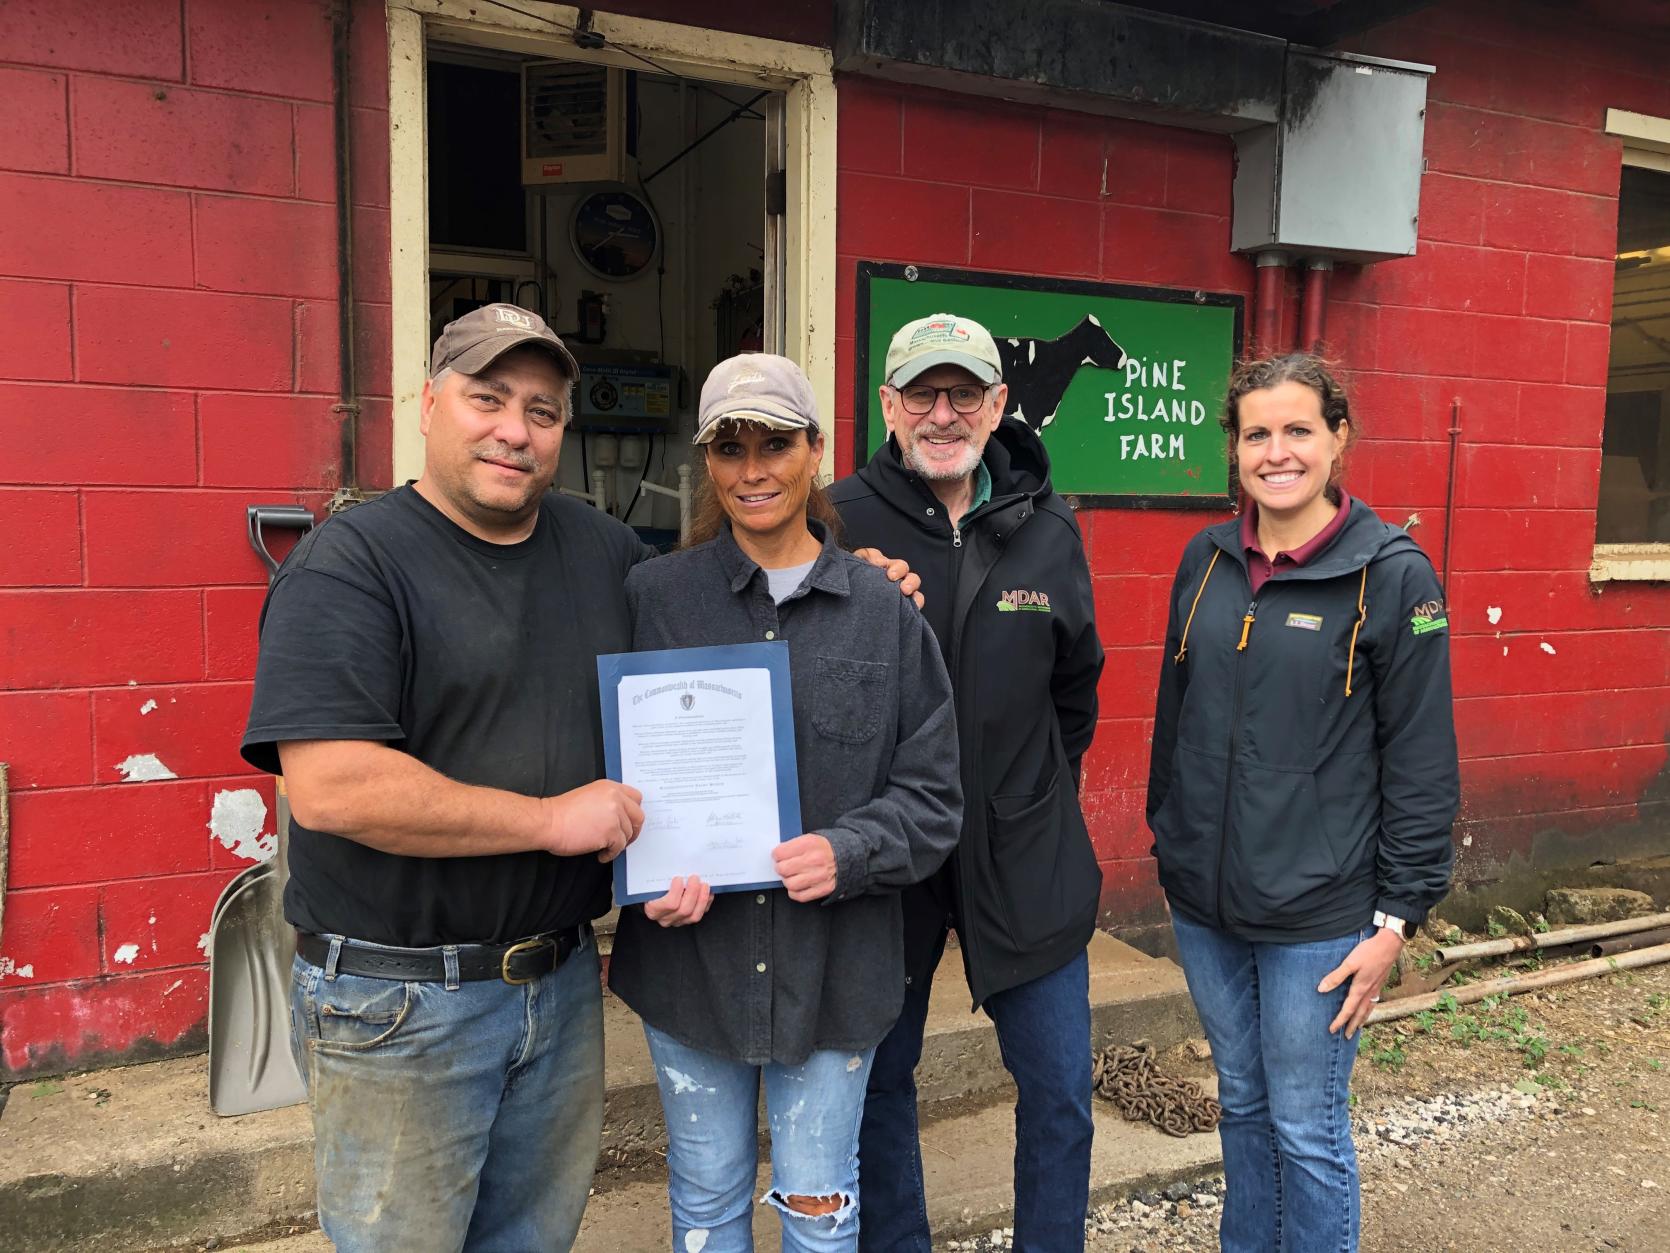 Massachusetts Department of Agricultural Resources (MDAR) Commissioner John Lebeaux and Deputy Commissioner Ashley Randle visit Pine Island Farm in Sheffield and other dairy farms in celebration of June as “Massachusetts Dairy Month”. 